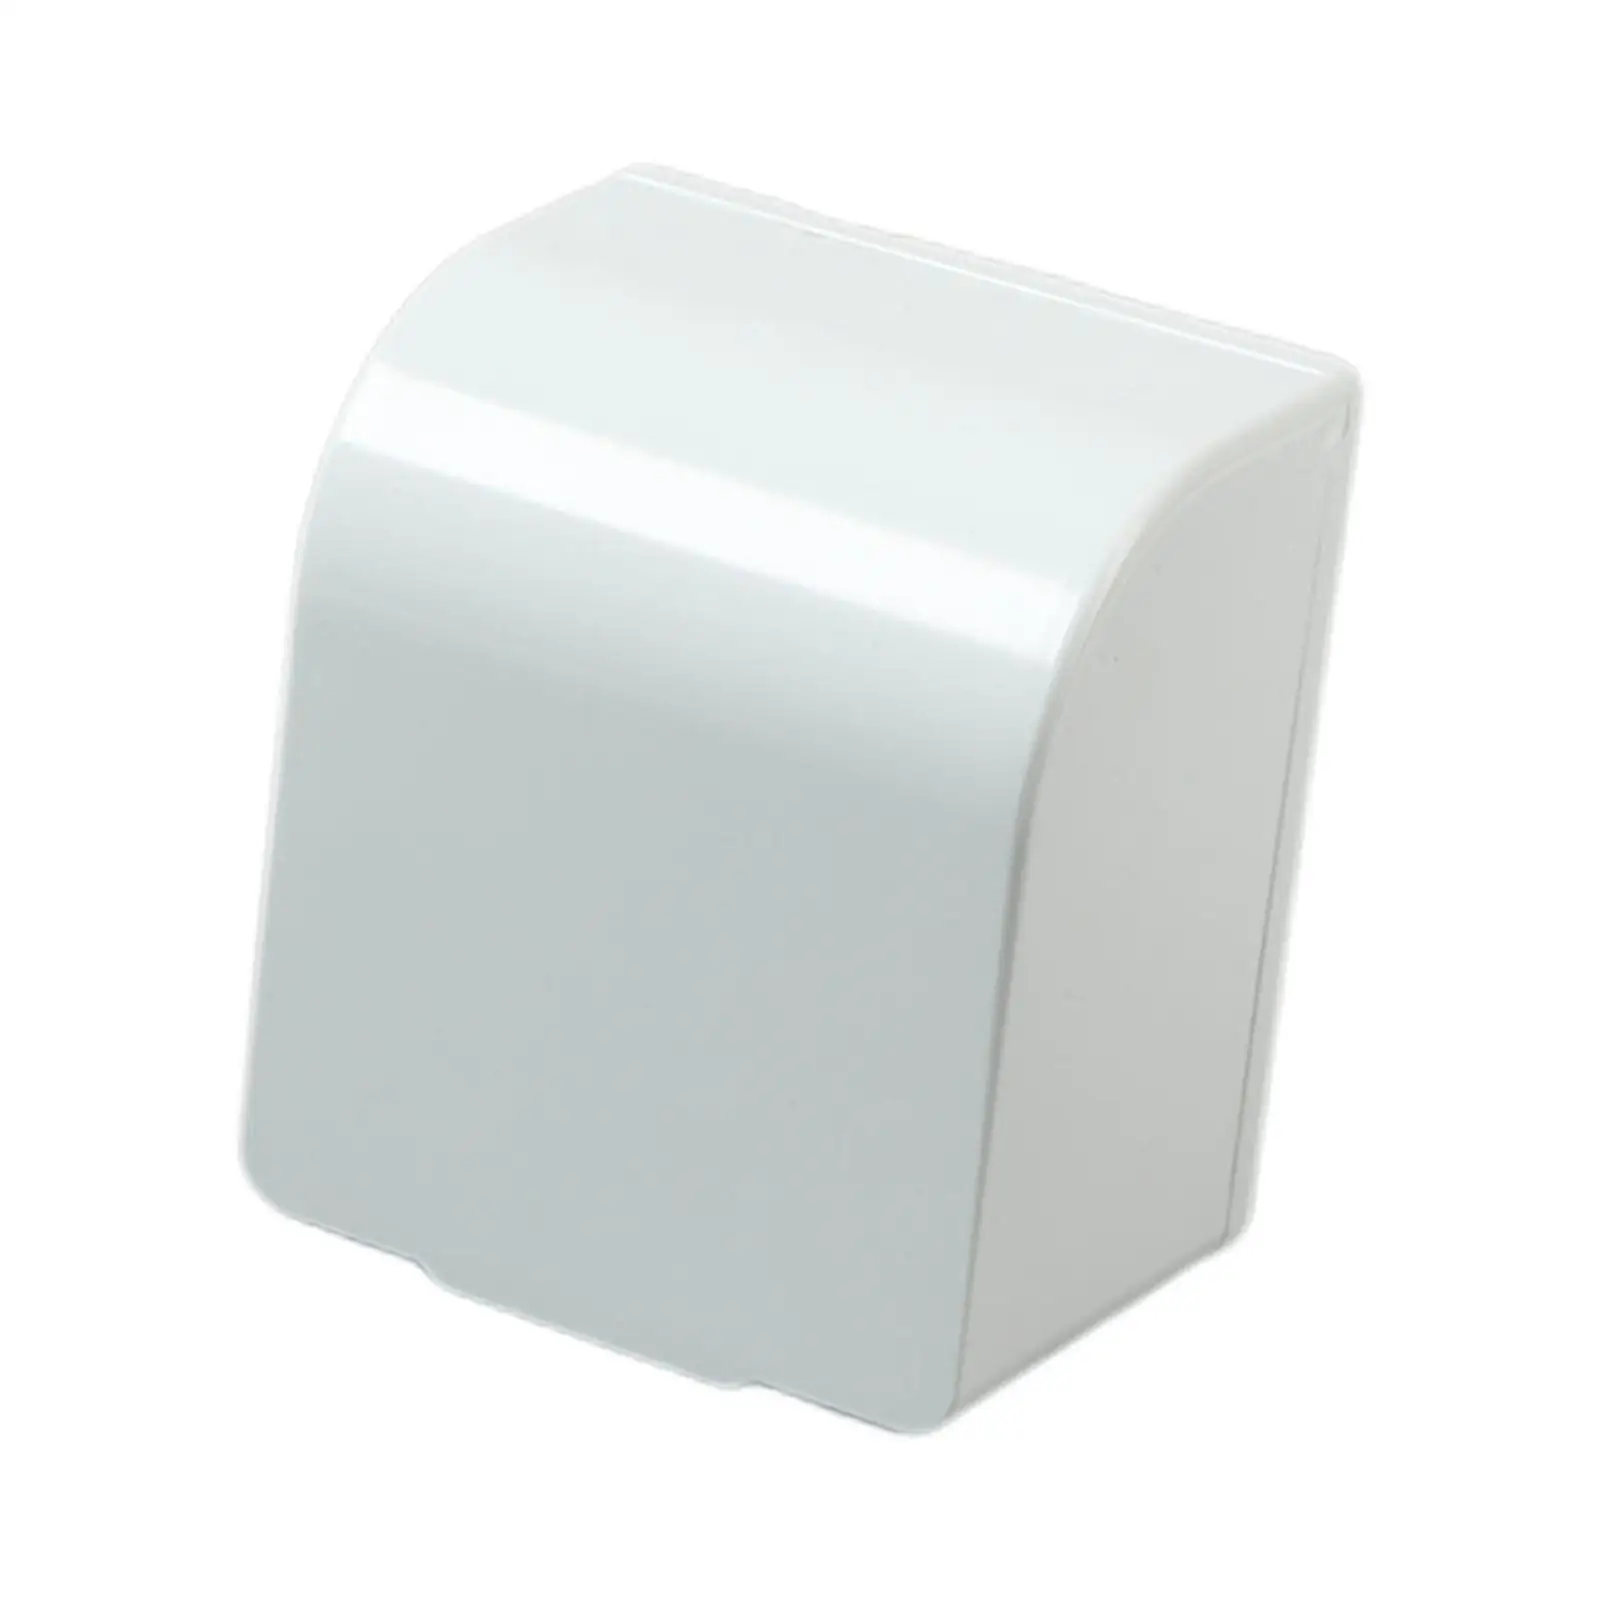 Waterproof Box Outlet Protective  Cover for Bathroom Electric Plug